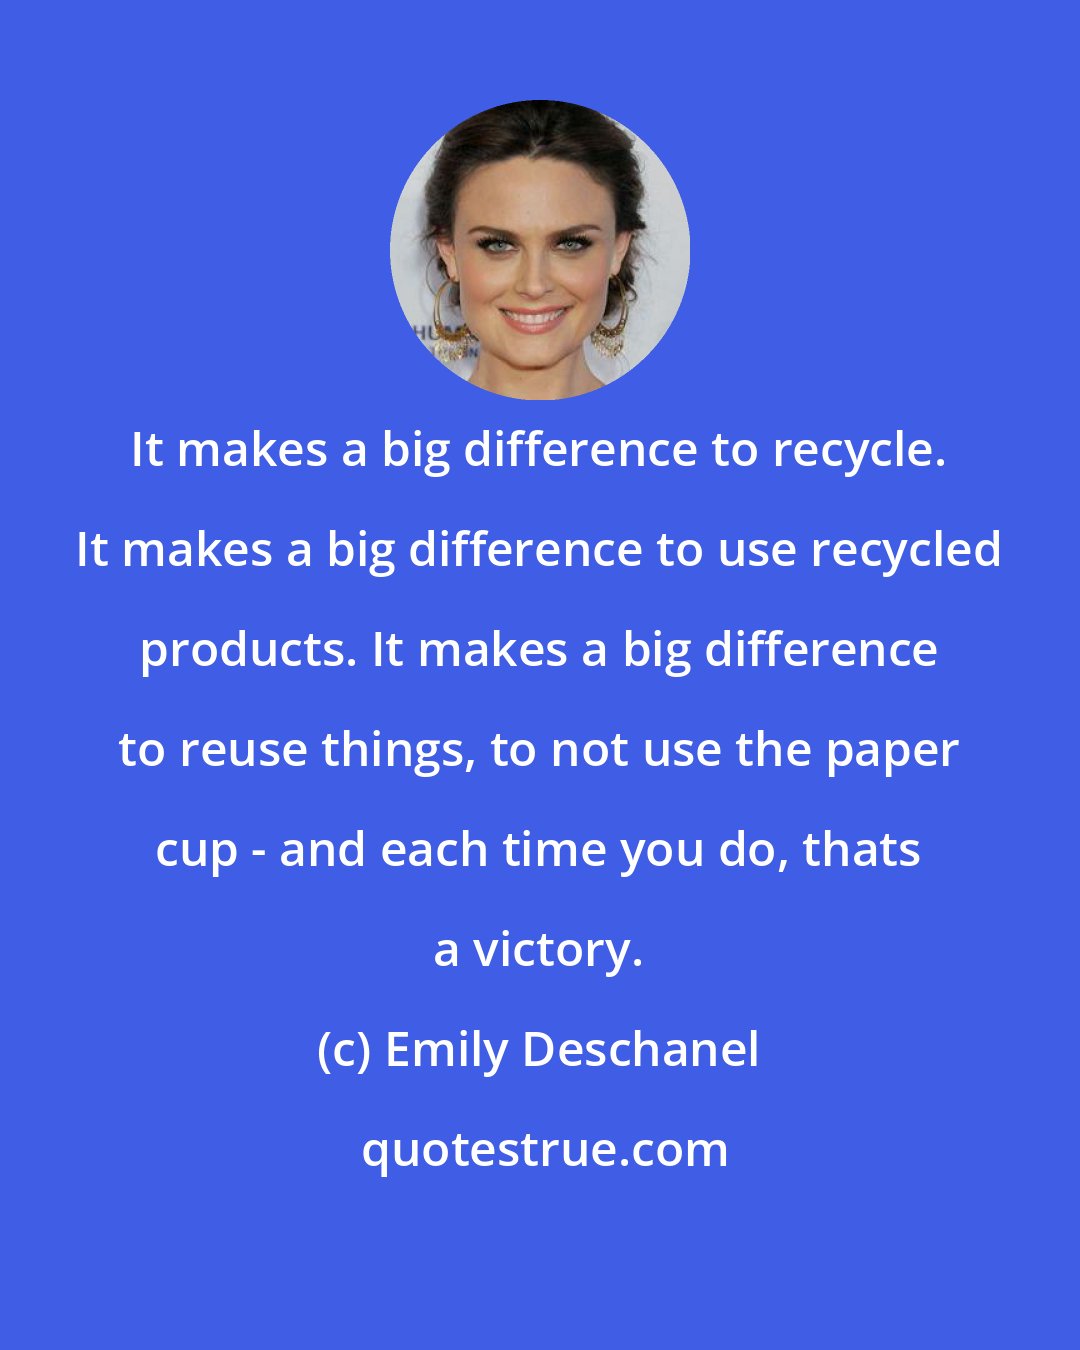 Emily Deschanel: It makes a big difference to recycle. It makes a big difference to use recycled products. It makes a big difference to reuse things, to not use the paper cup - and each time you do, thats a victory.